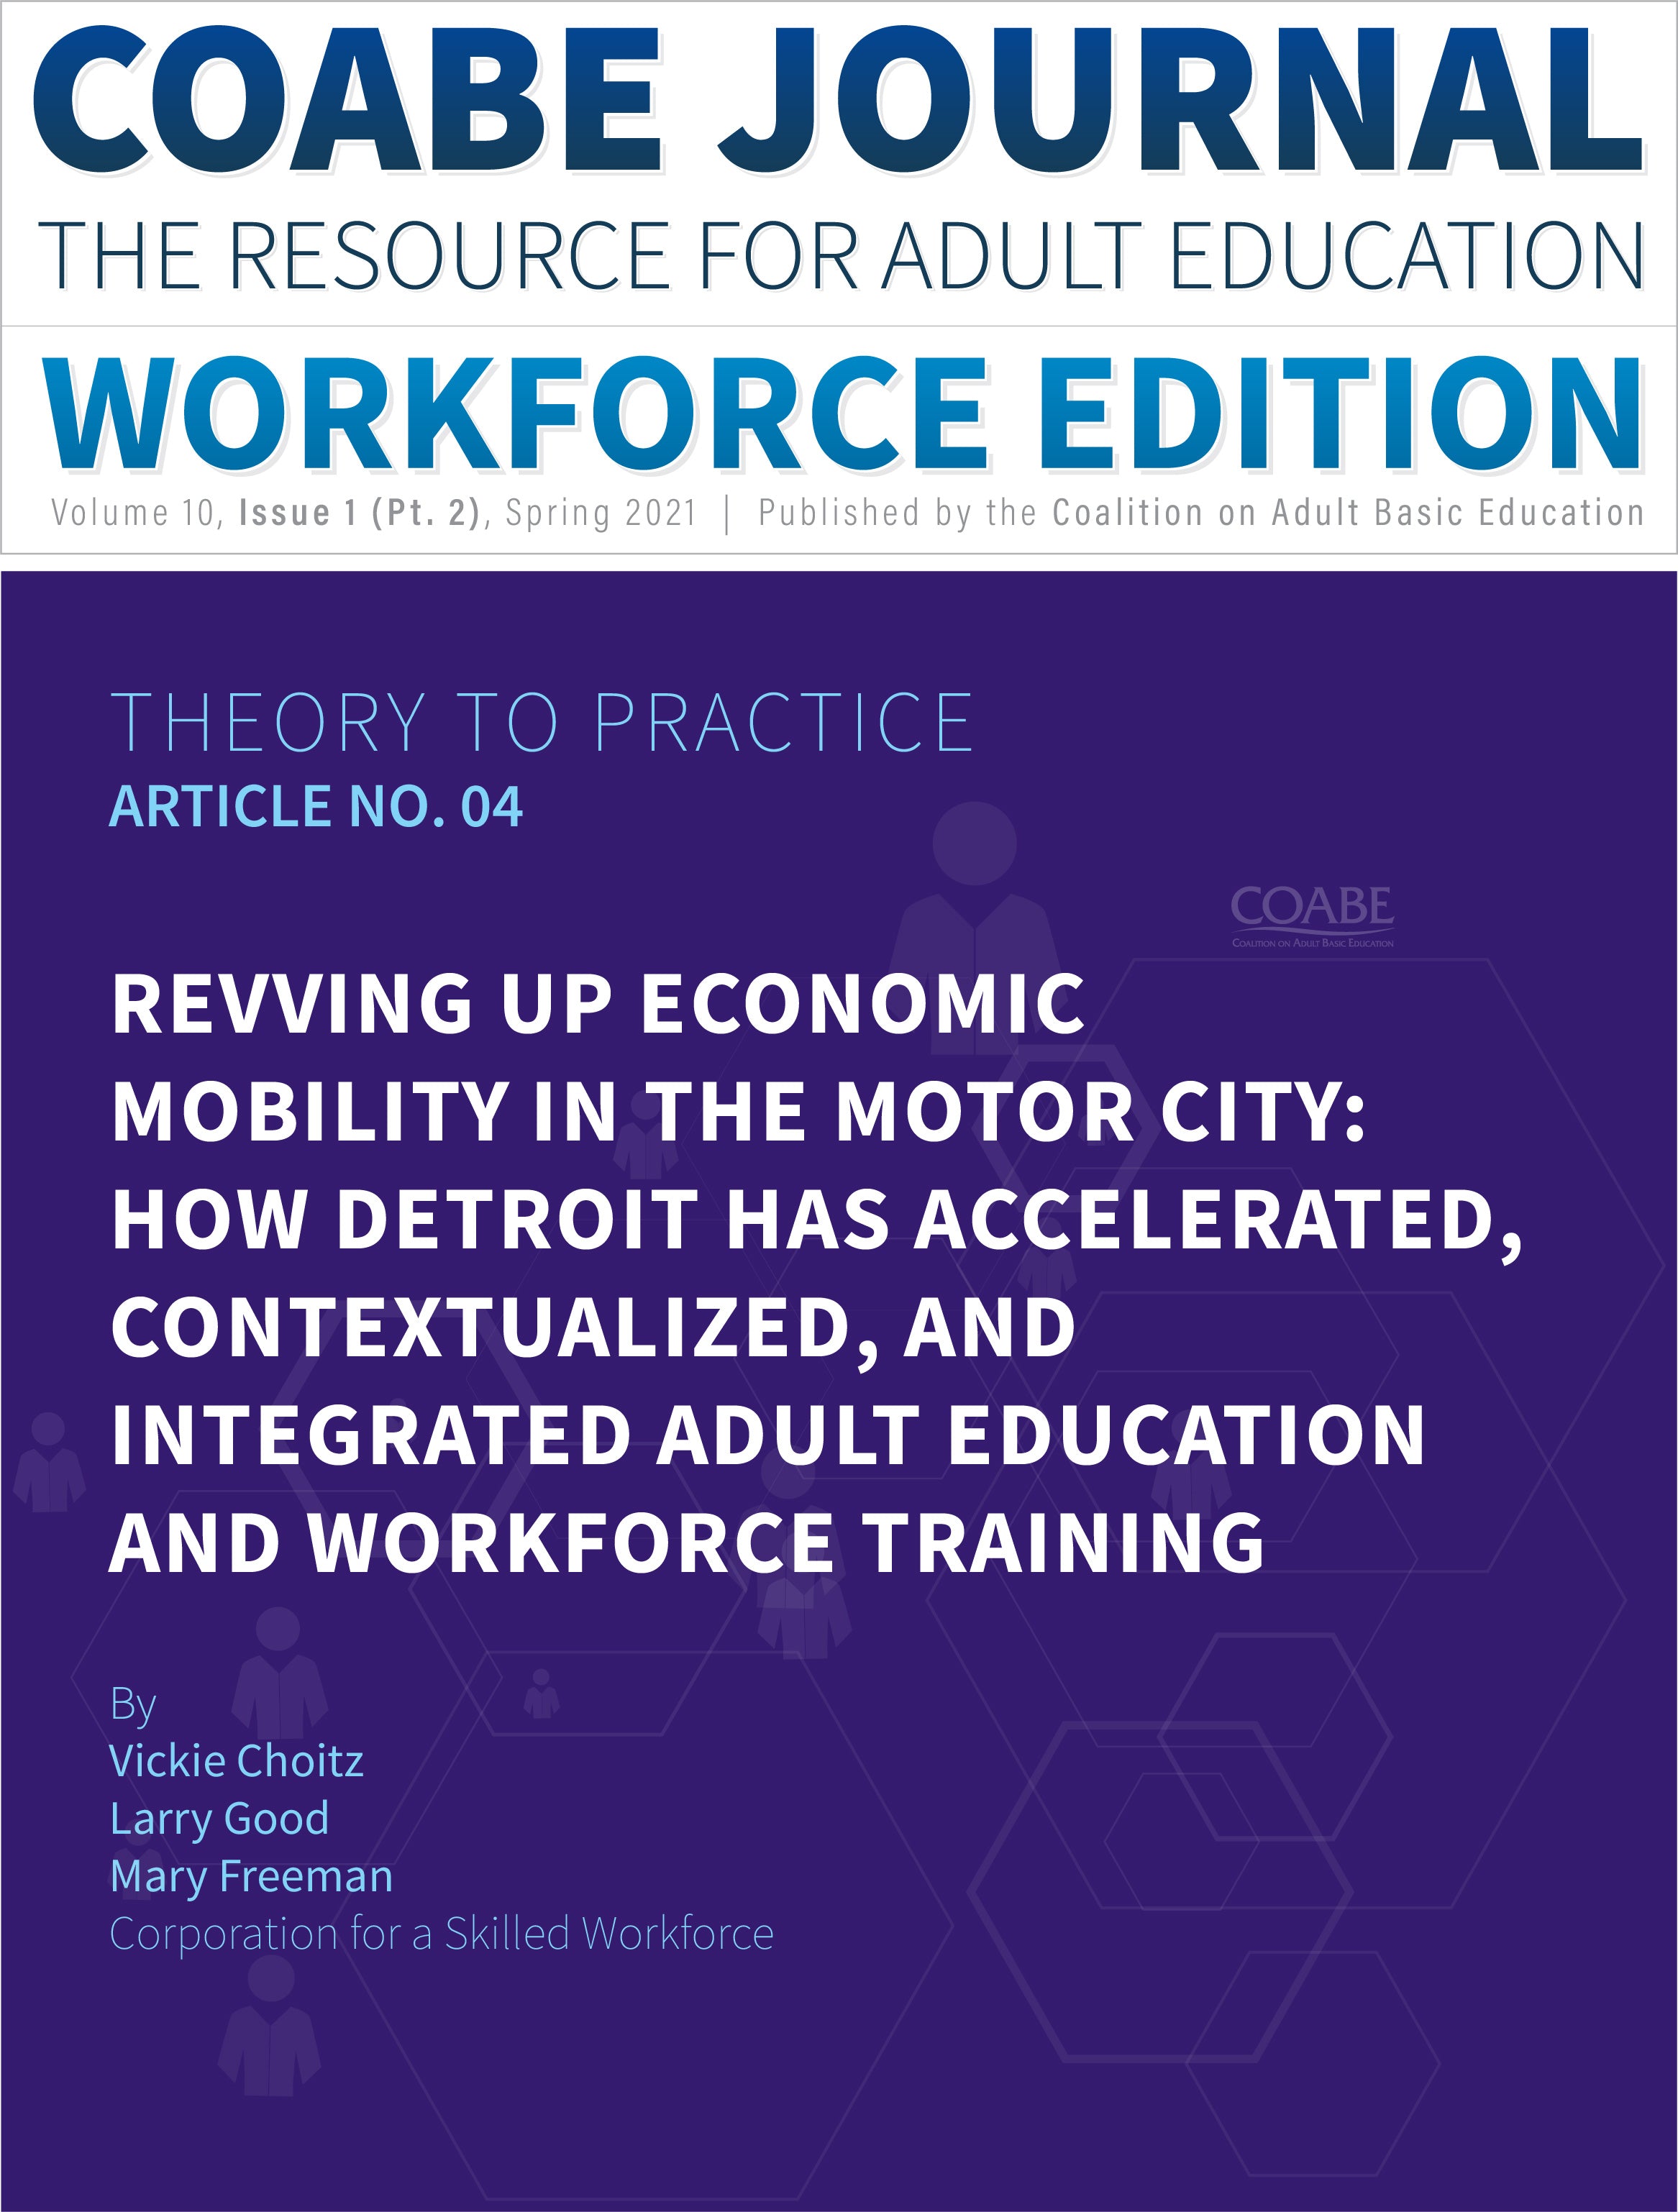 Article 04 :: Revving Up Economic Mobility In The Motor City: How Detroit Has Accelerated, Contextualized, And Integrated Adult Education And Workforce Training